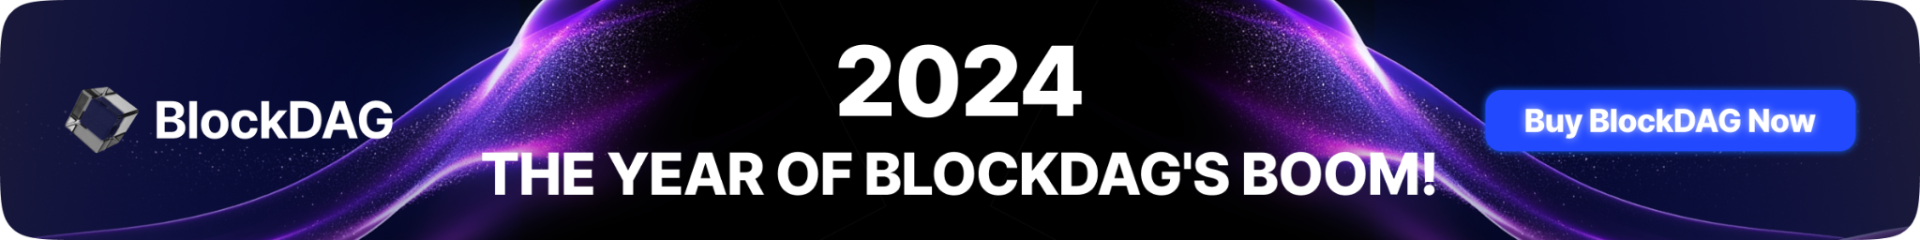 Looking for the Best Pick of 2024? BlockDAG Leads with $54.3M, Uniswap Dominates DEX, Ethereum Classic Attracts Whales